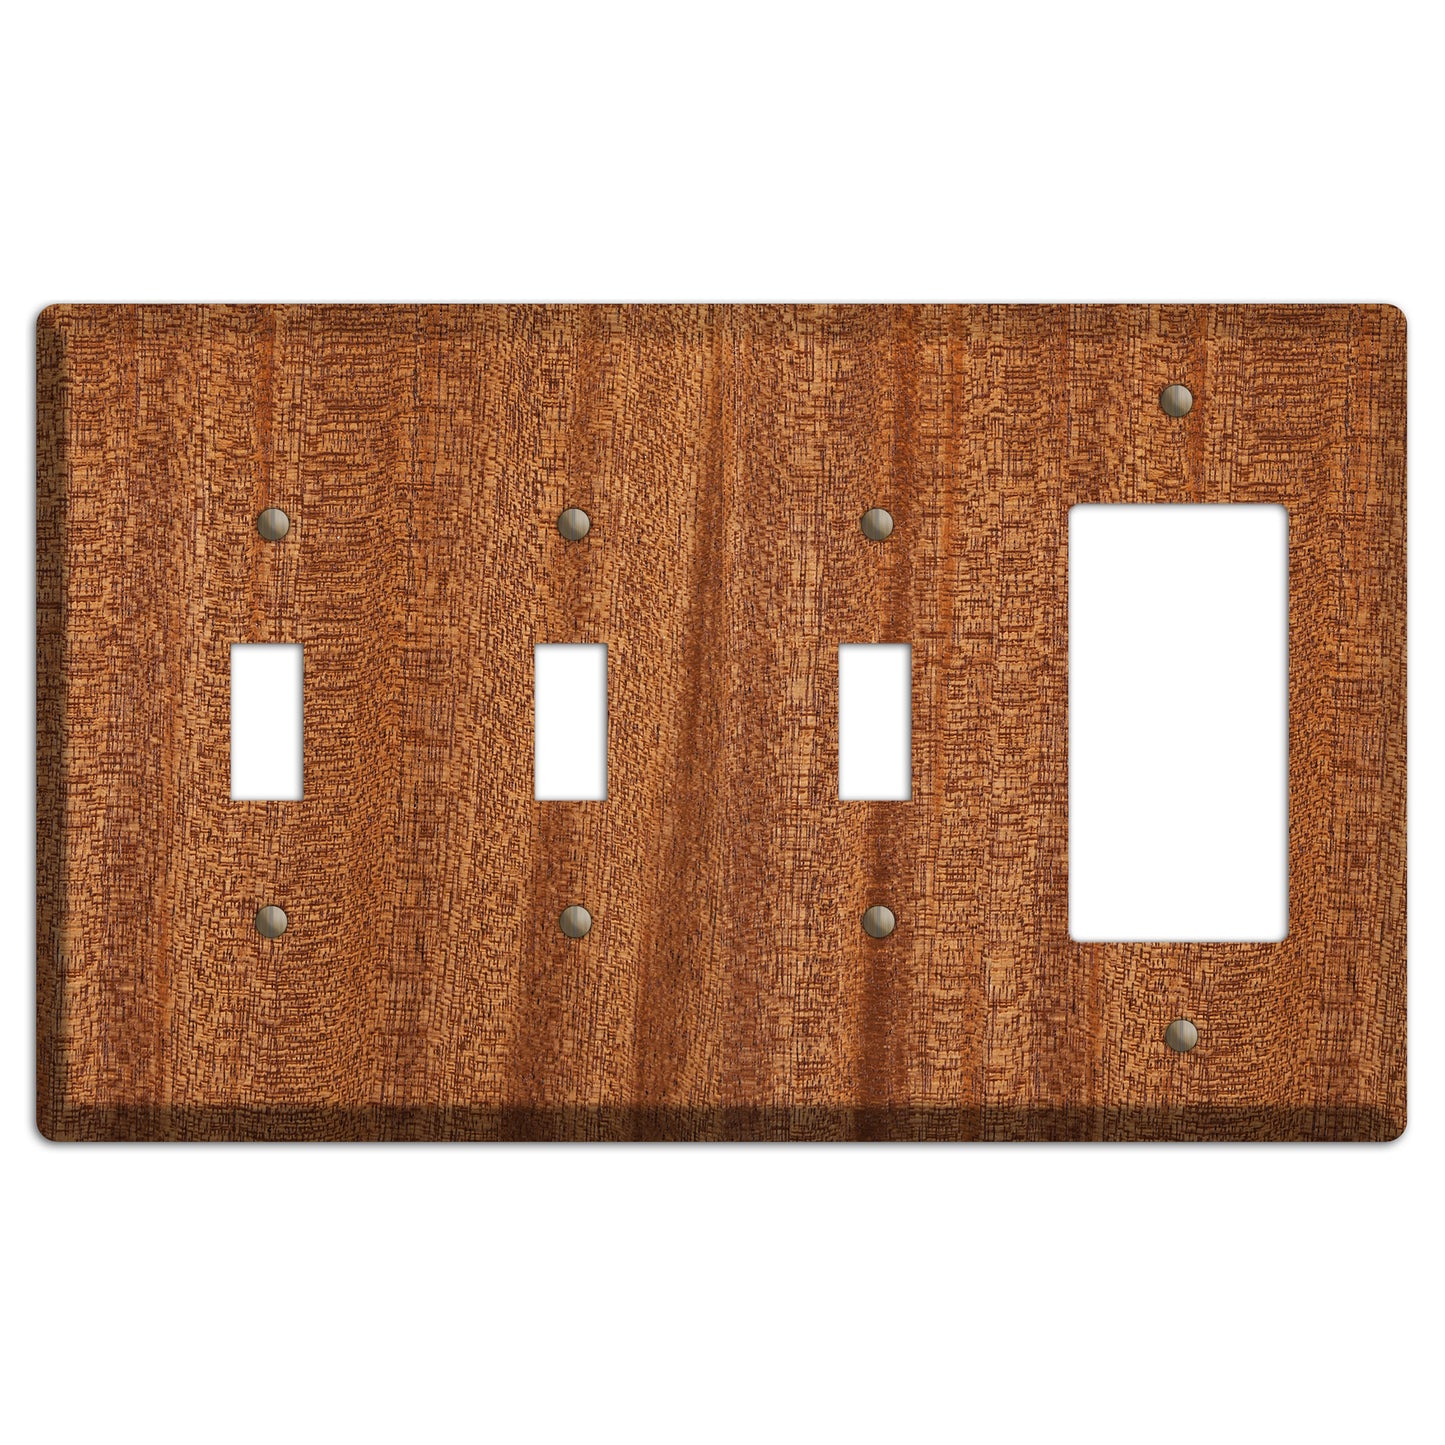 Mahogany Wood 3 Toggle / Rocker Outlet Cover Plate